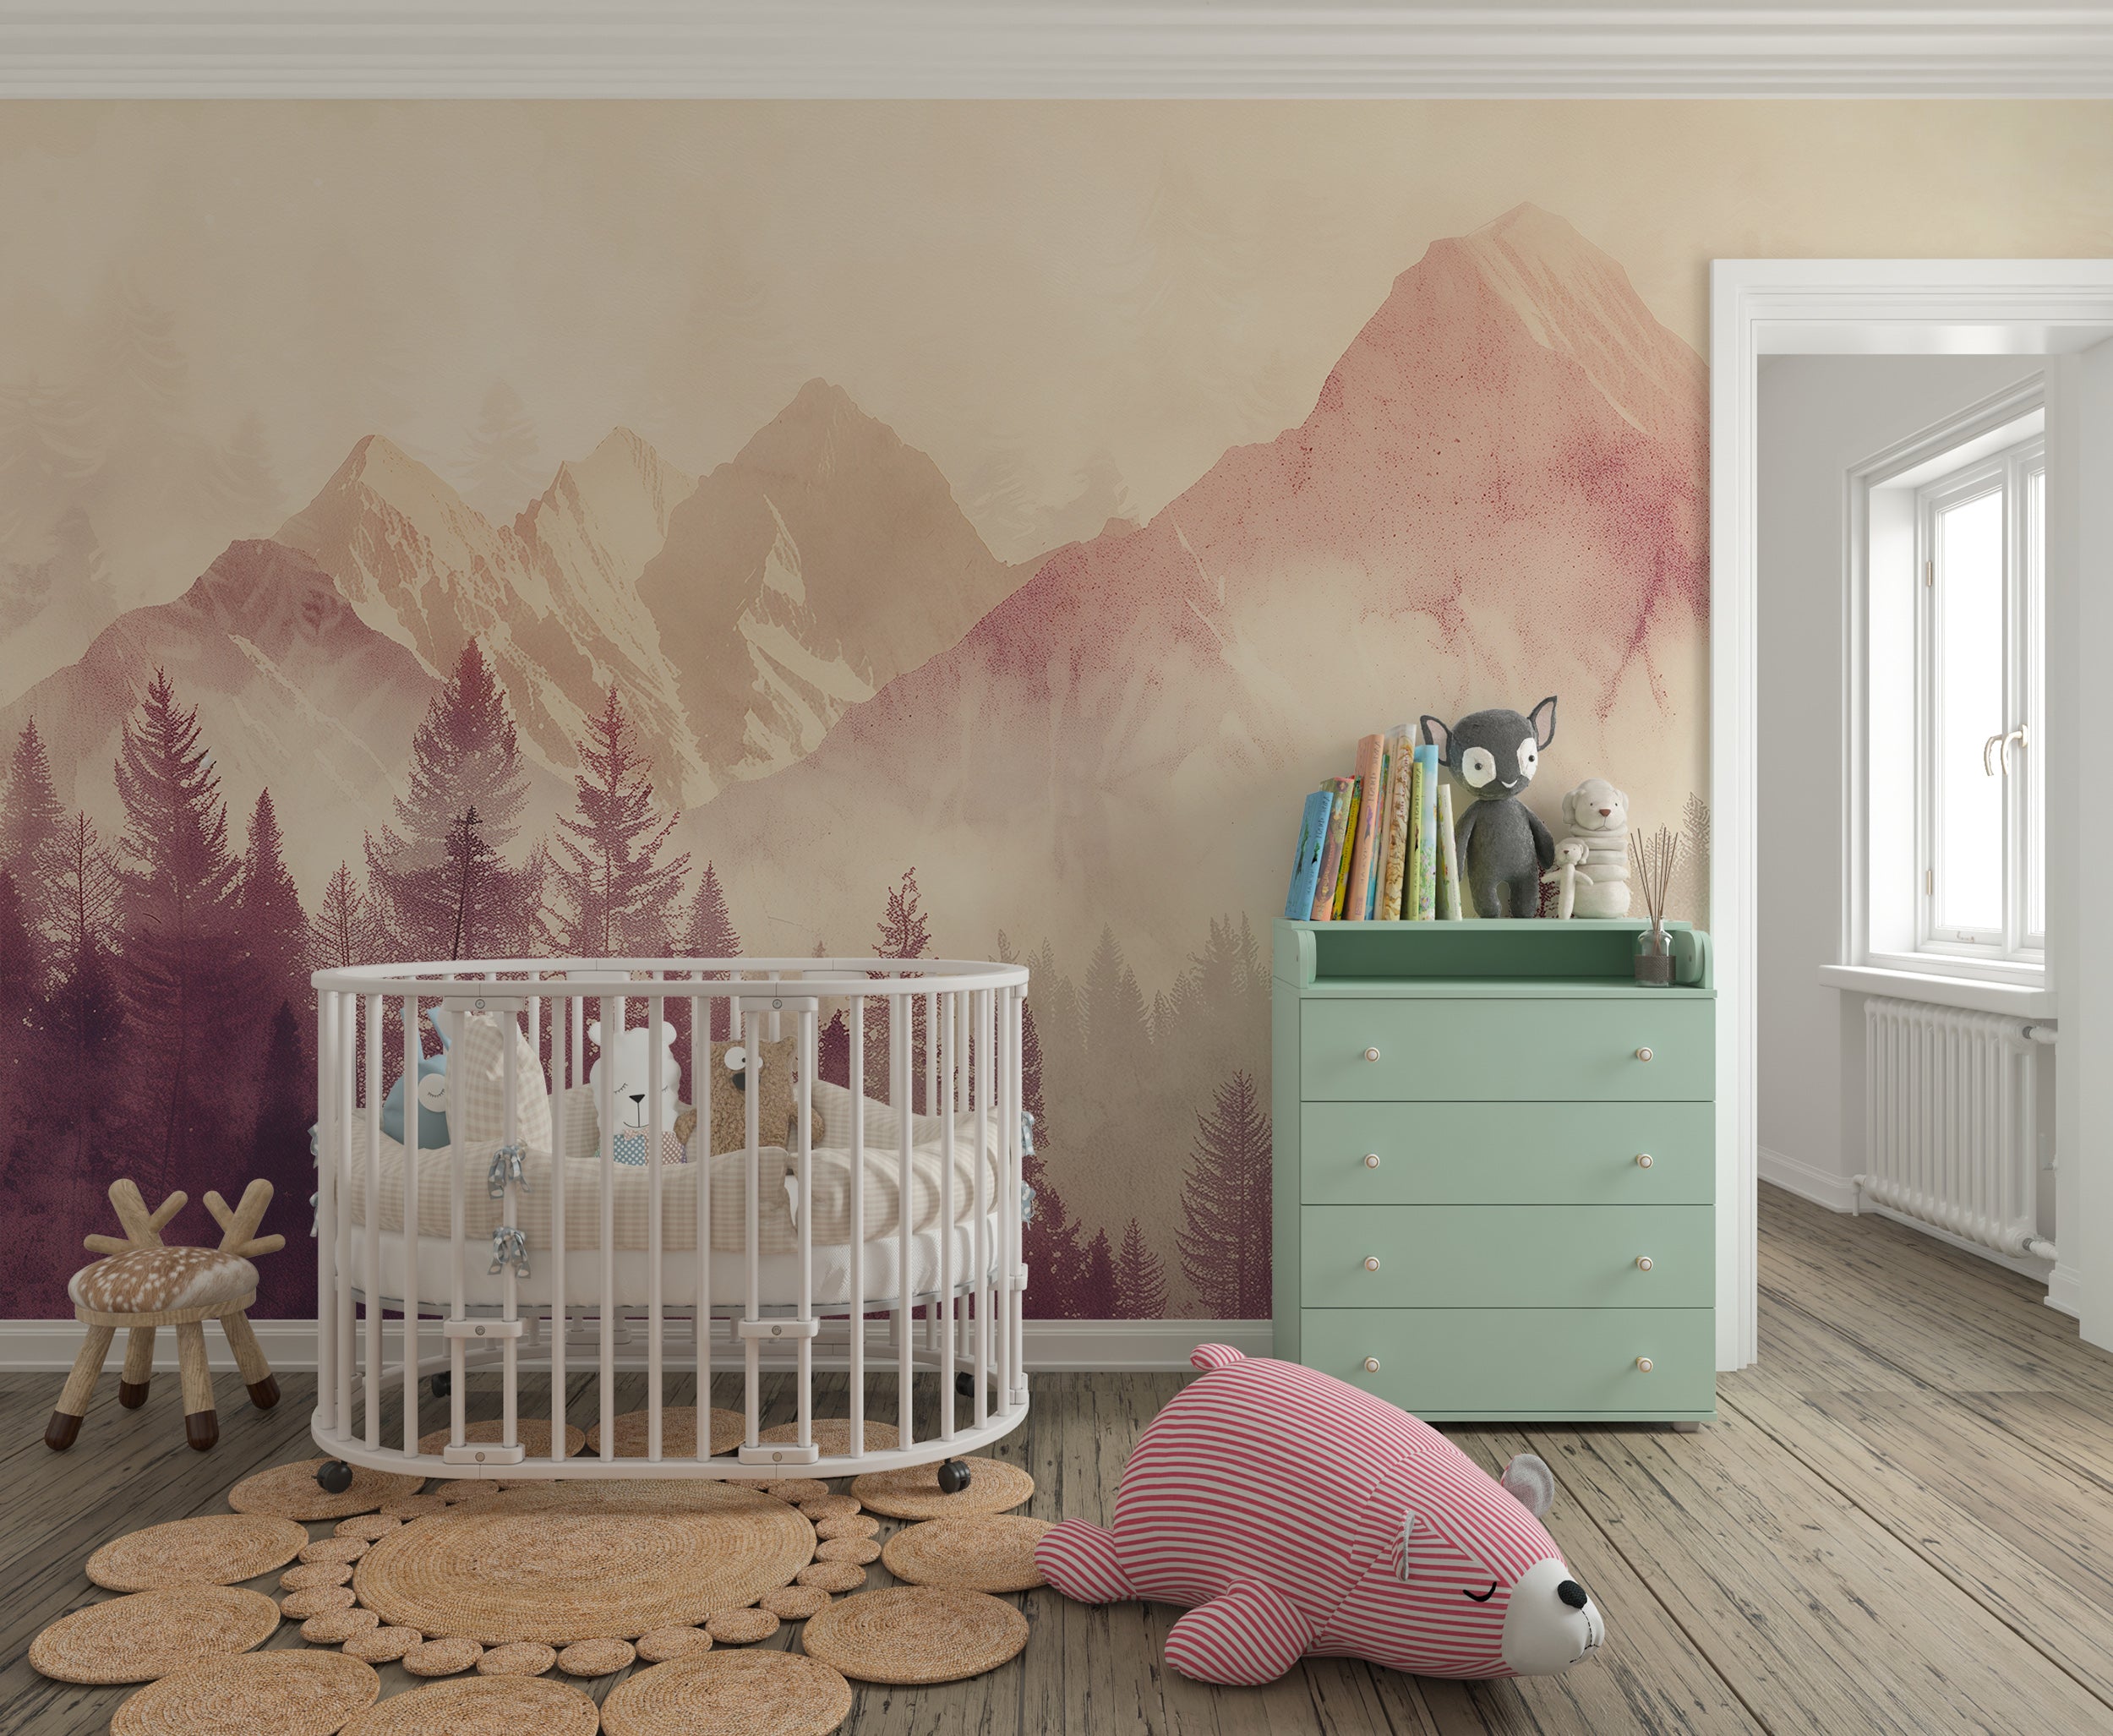 Soft Pink Watercolor Mountain and Forest Wallpaper, Nursery Pastel Pink Nature Landscape Mural, Peel & Stick Removable Pink Monochrome Decor